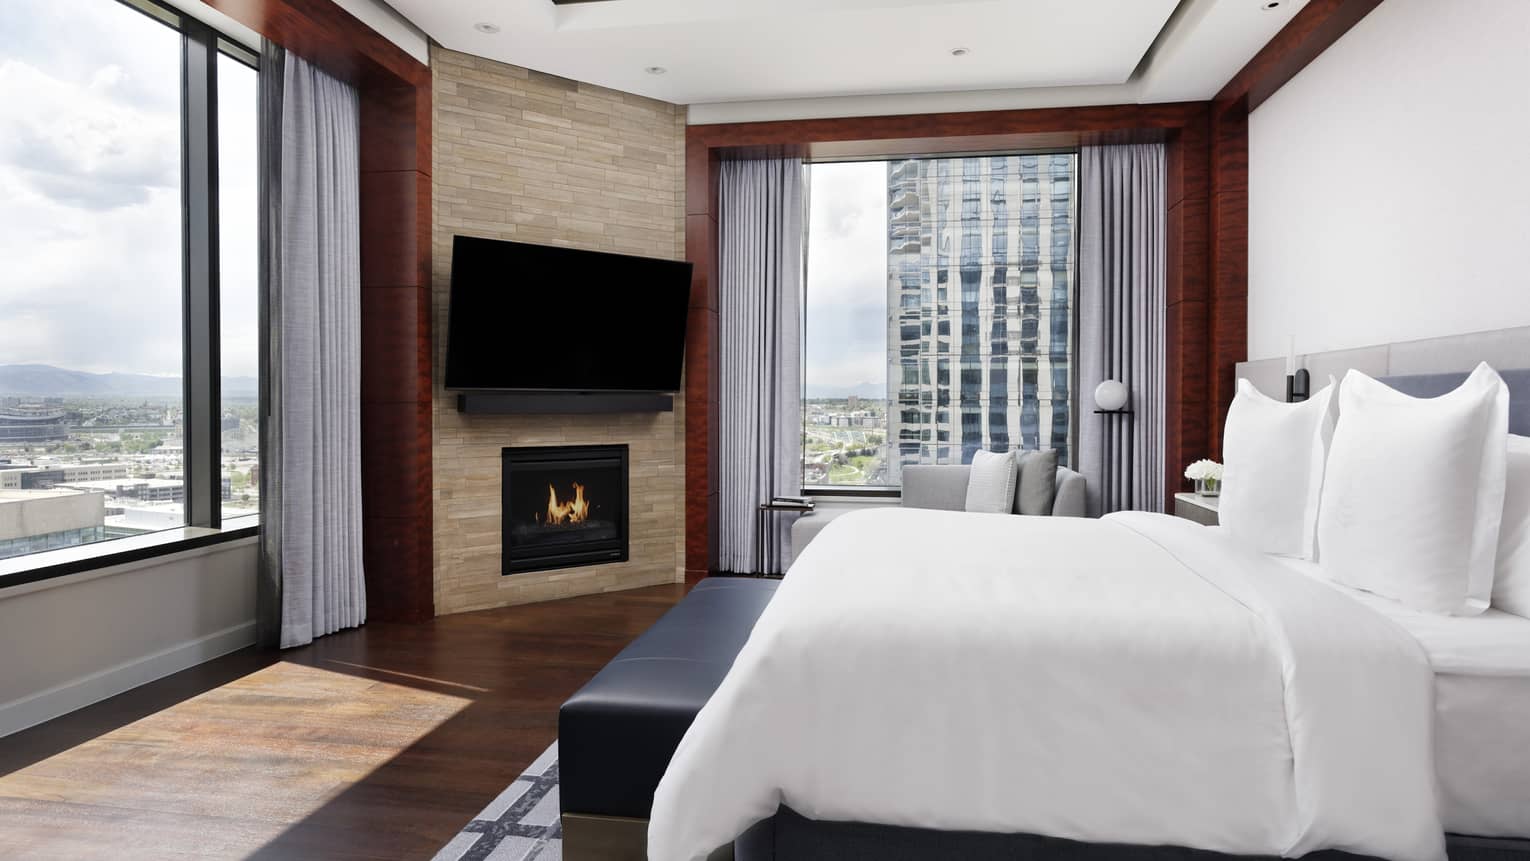 Corner guest room at Four Seasons Hotel Denver. City views through two large windows, king bed, fireplace, wall-mounted TV.